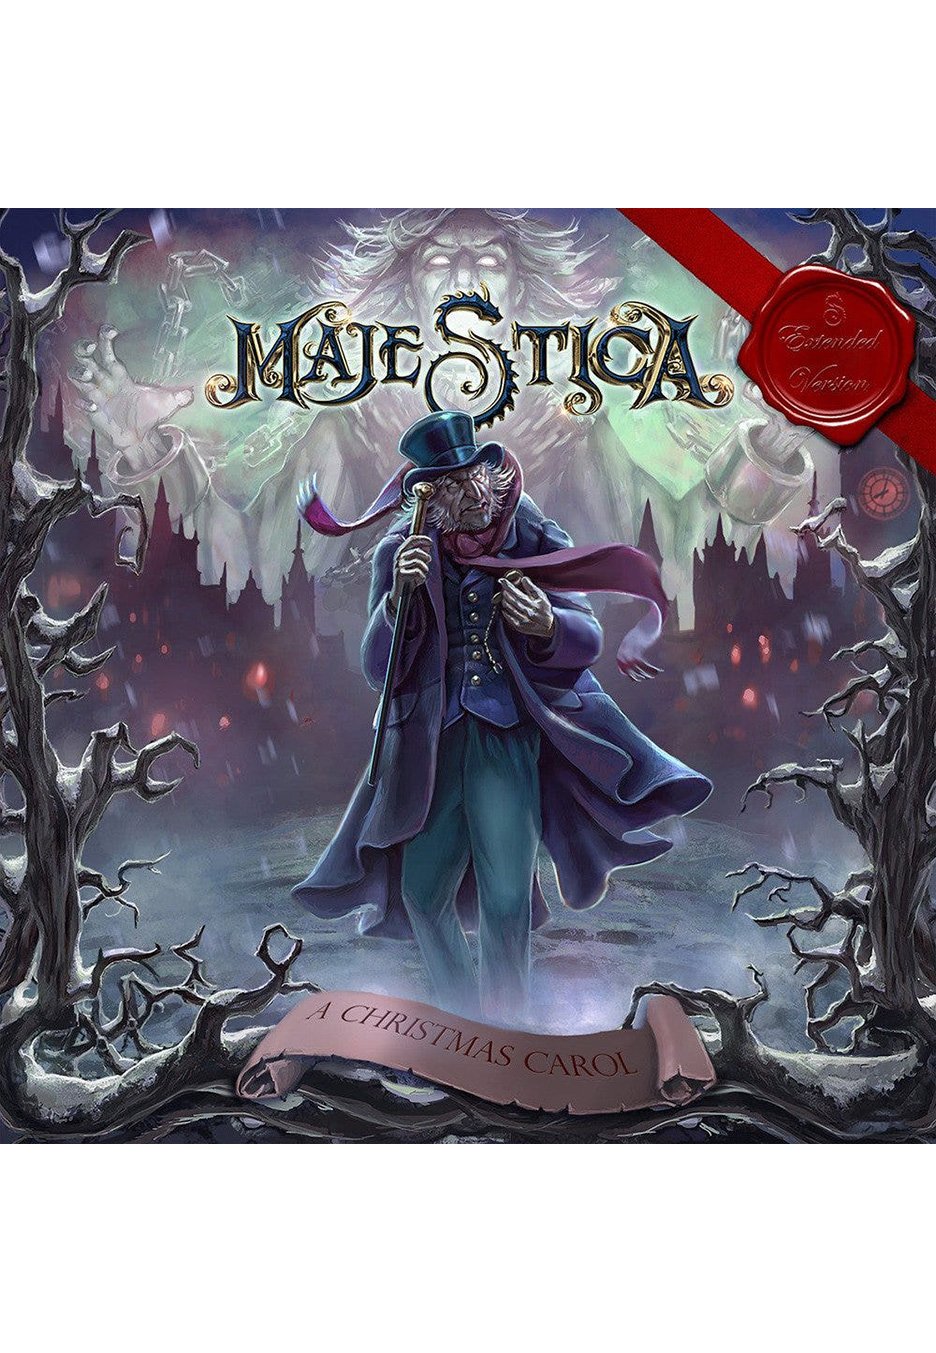 Majestica - A Christmas Carol (Extended Version) Purple - Colored Vinyl